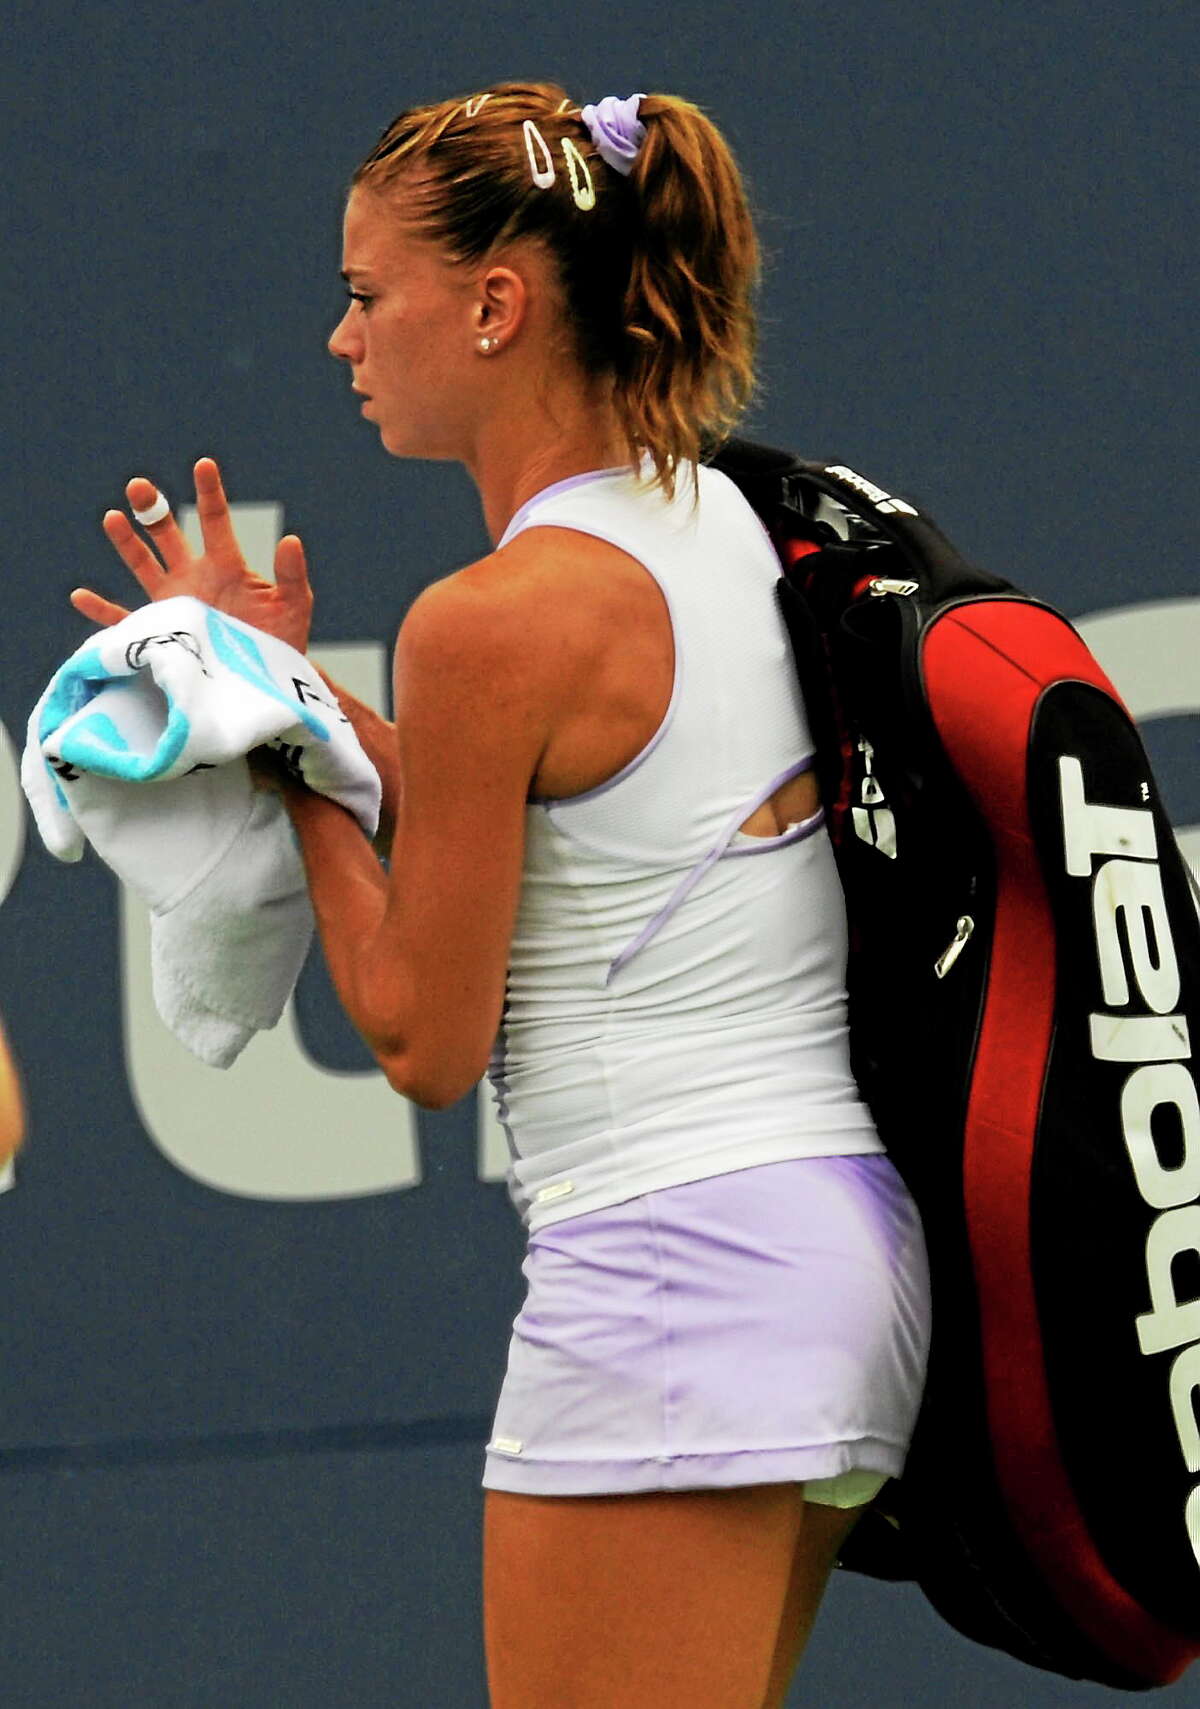 Camila Giorgi fell to Magdalena Rybarikova 6-2, 6-4 in the semifinals of the Connecticut Open on Friday in New Haven.